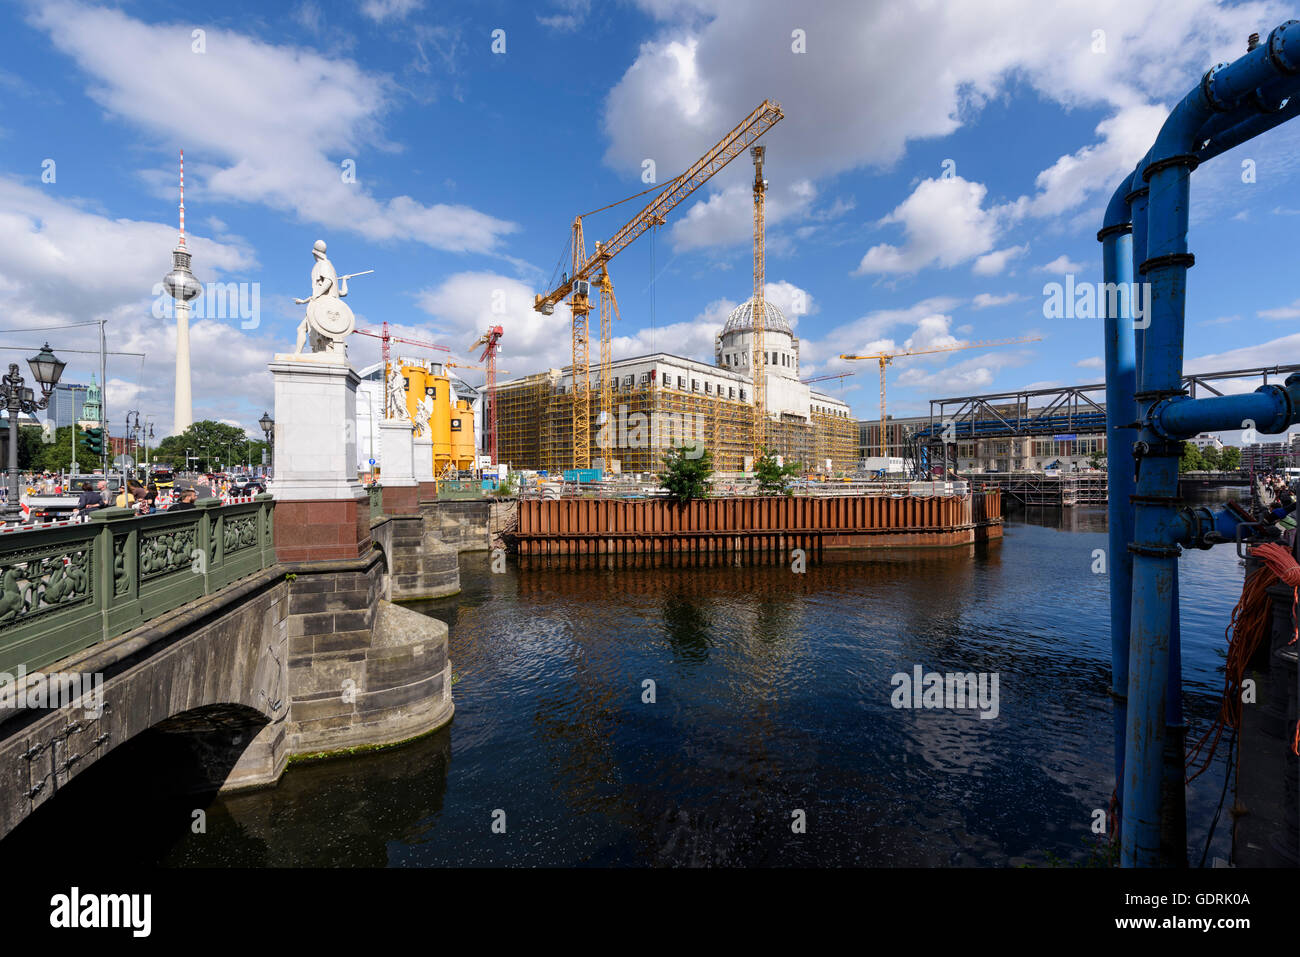 Berlin. Germany. July 2016. Re-construction of the Berliner Schloss, replacing the original destroyed by the DDR in 1950. Stock Photo